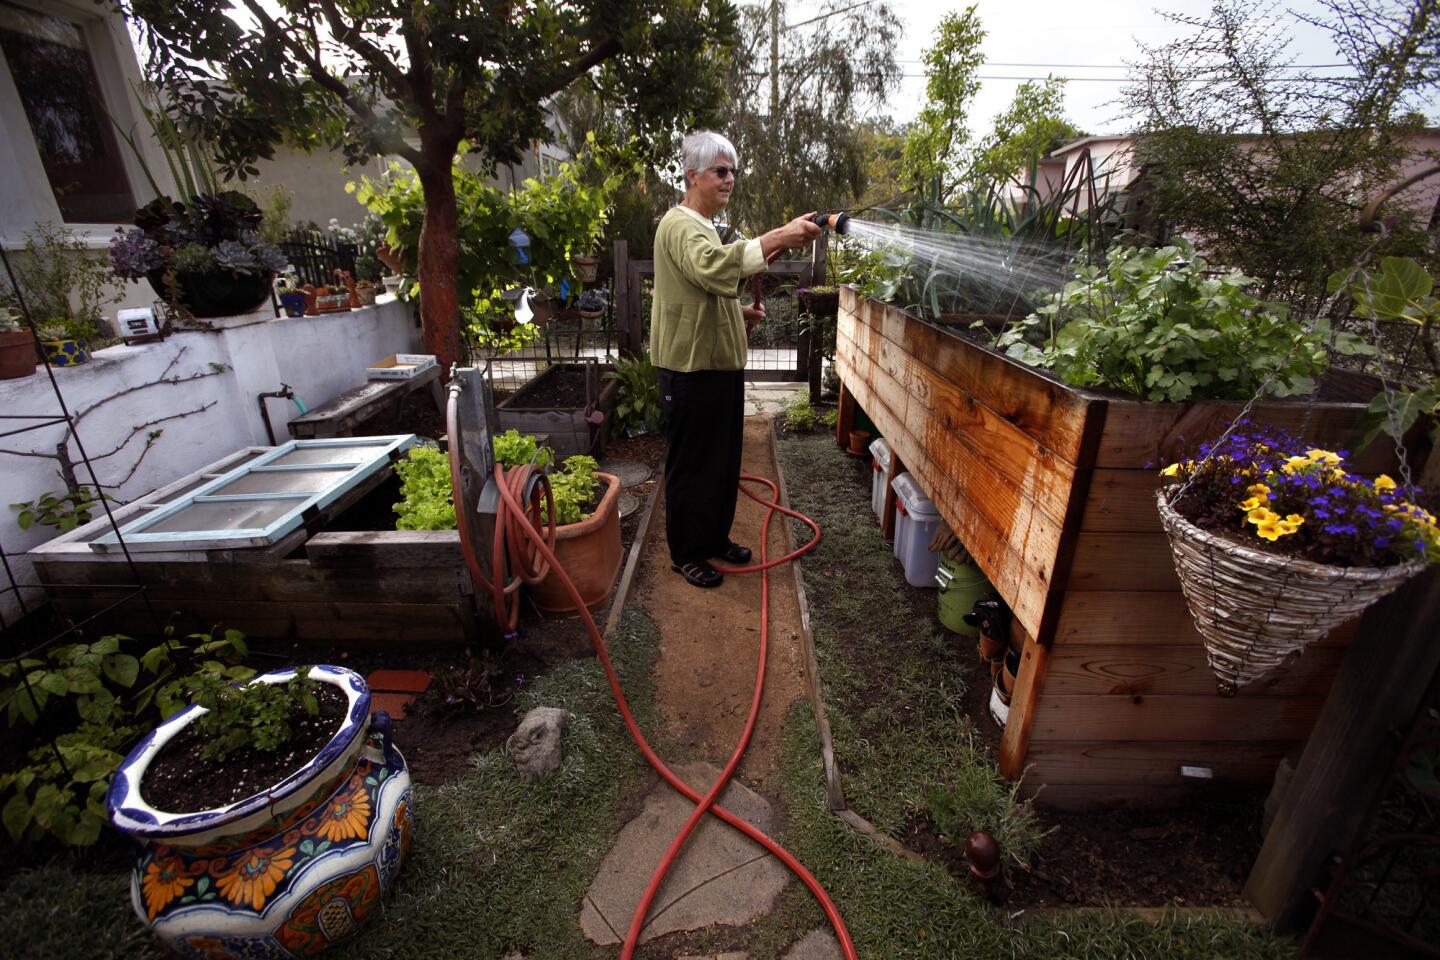 Leigh Curran waters vegetables and herbs that are planted in an extra-high raised bed to better capture sunlight. The height also allows for storage underneath. The water drains to the frontyard plants along the sidewalk facing the street.